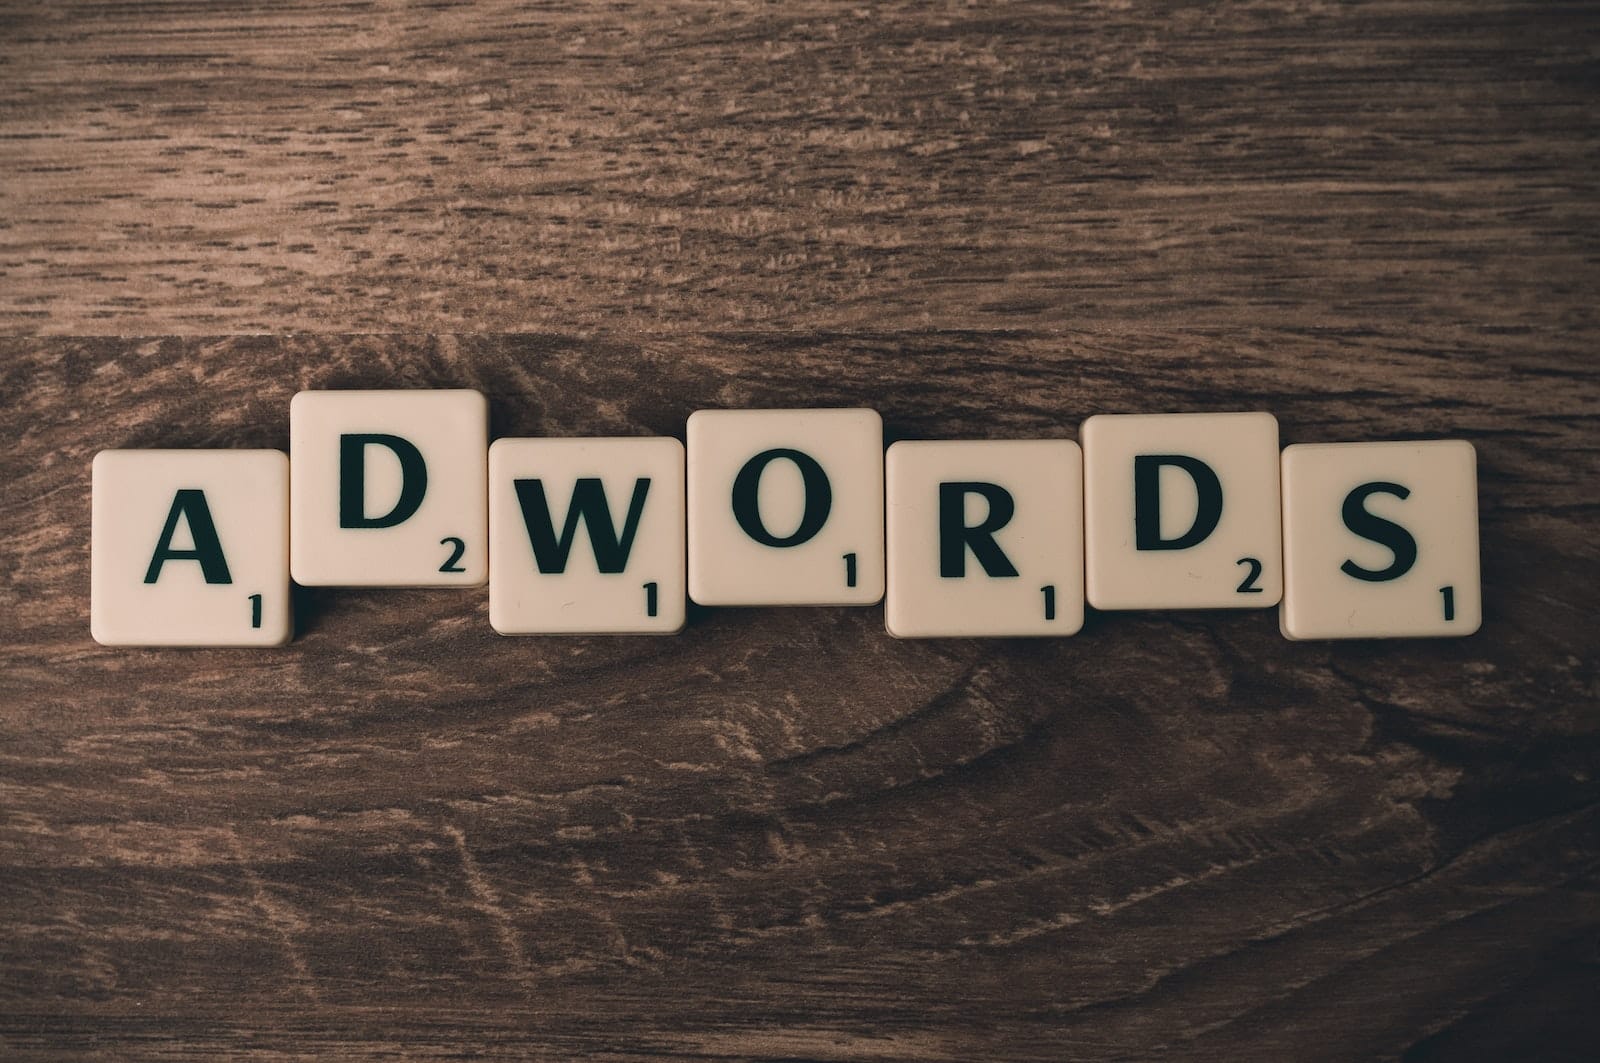 Scrabble Forming Adwords on Brown Wooden Surface